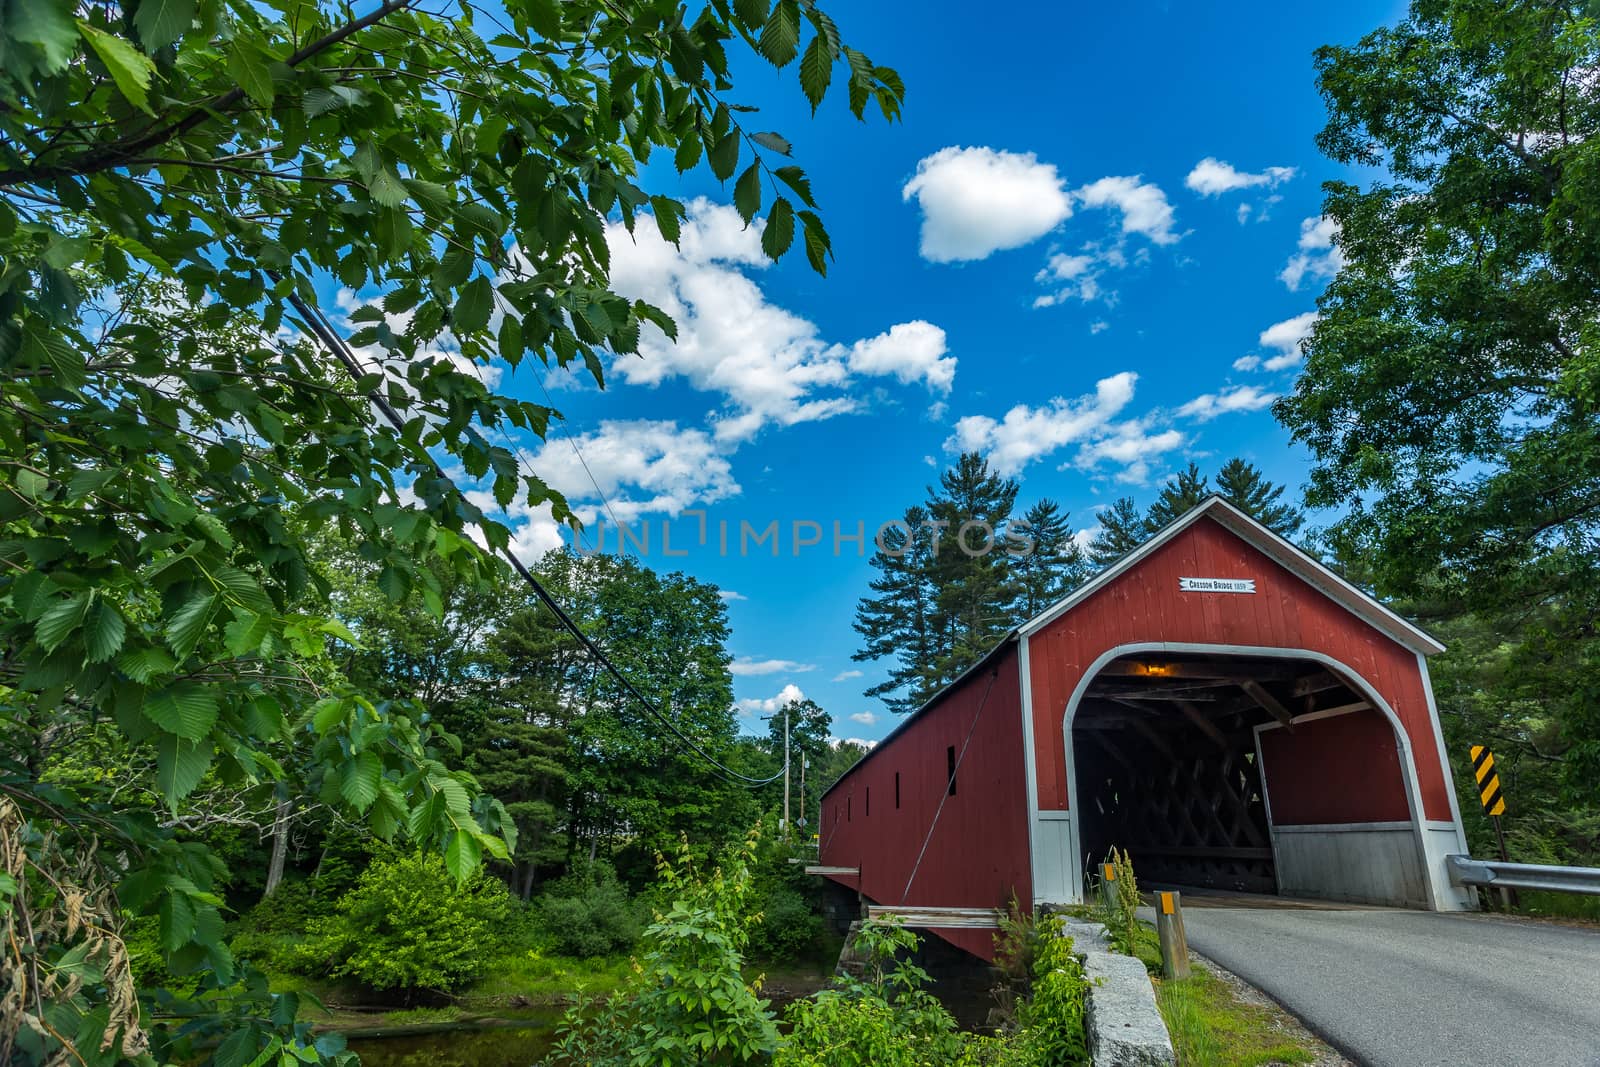 The Sawyers Crossing Covered Bridge, also known as the Cresson Bridge, is a wooden covered bridge carrying Sawyers Crossing Road over the Ashuelot River in northern Swanzey, New Hampshire.